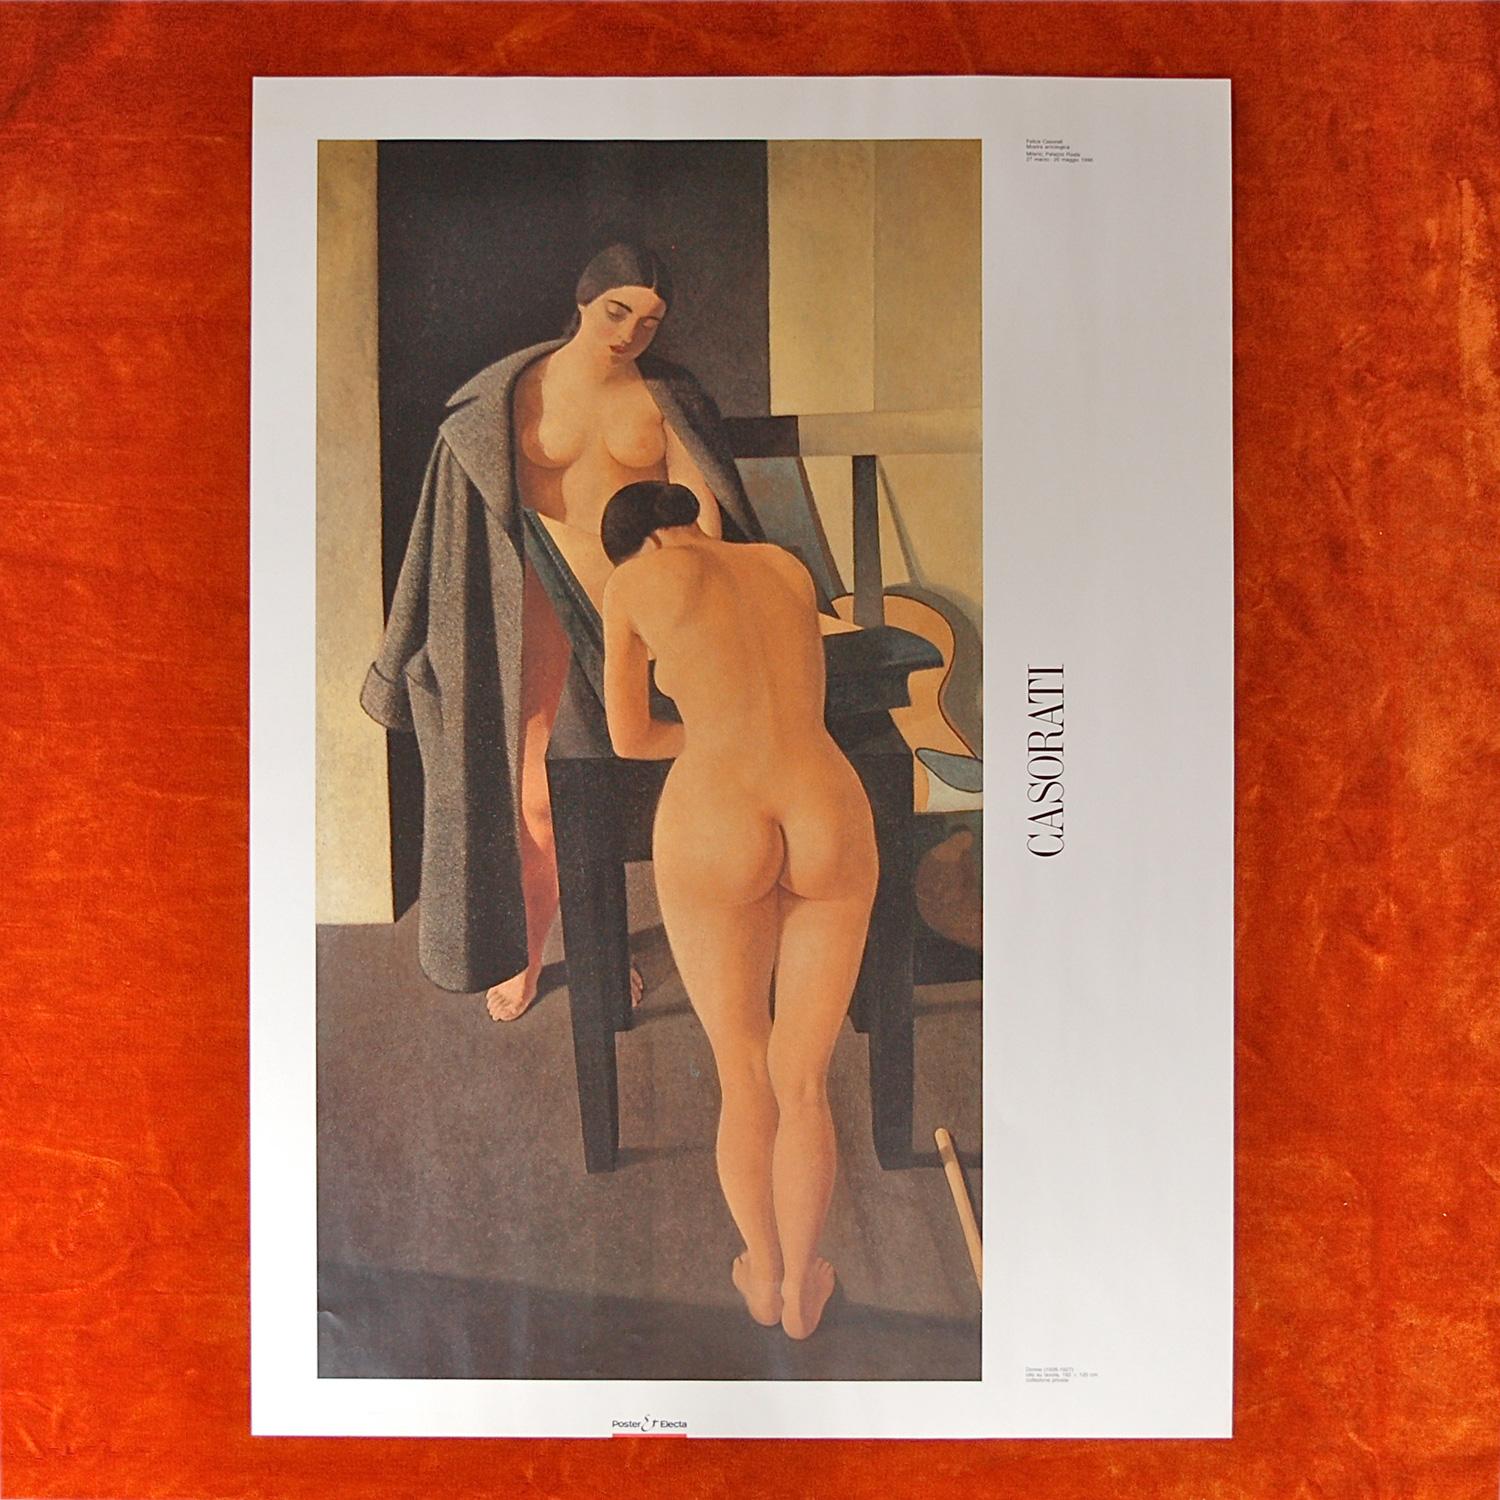 Large, unframed, high quality print and original poster of the Felice Casorati exhibition in the Palazzo Reale in Milan, 1990. It features a large print of the painting 